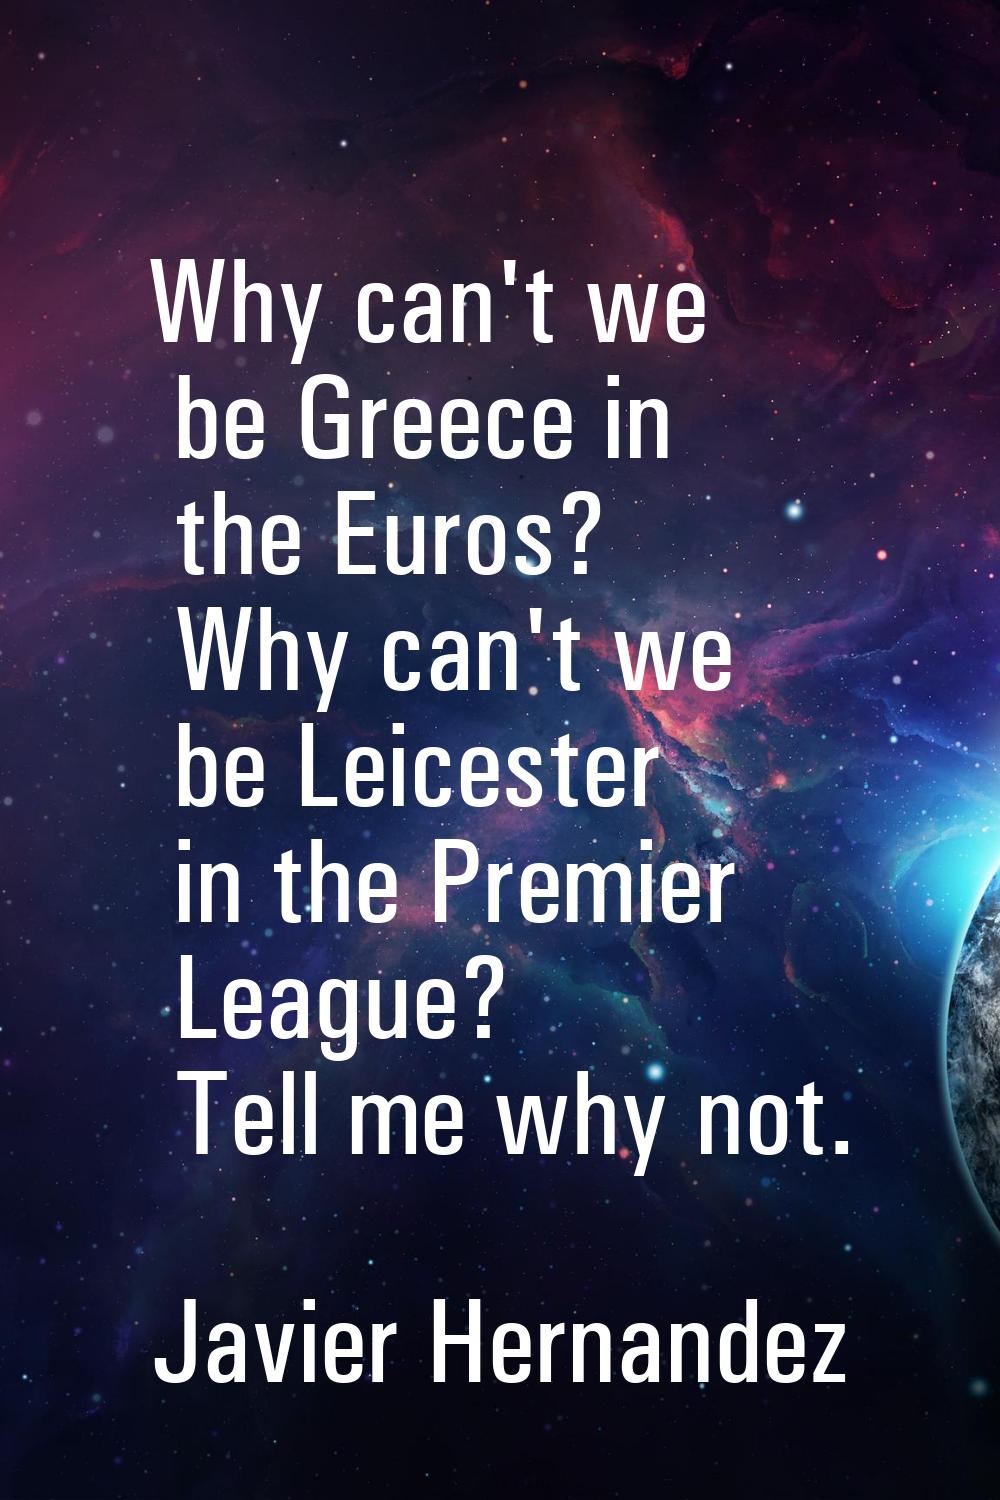 Why can't we be Greece in the Euros? Why can't we be Leicester in the Premier League? Tell me why n